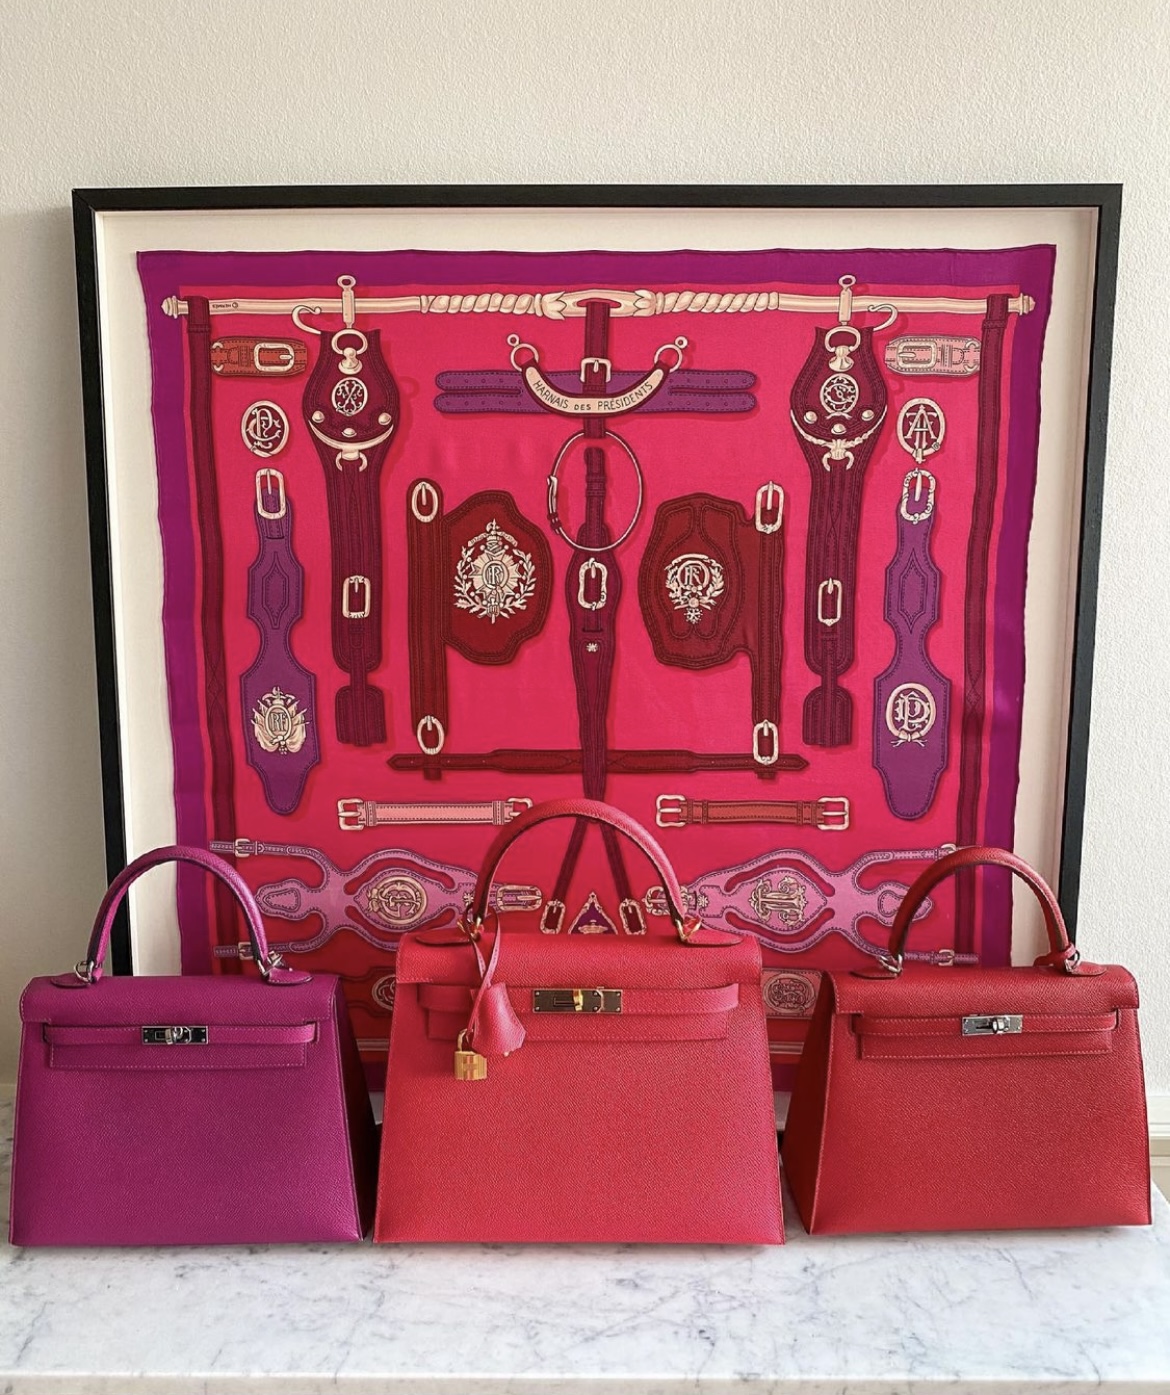 HERMES KELLY 25, 28 AND 32  EVERYTHING YOU NEED TO KNOW